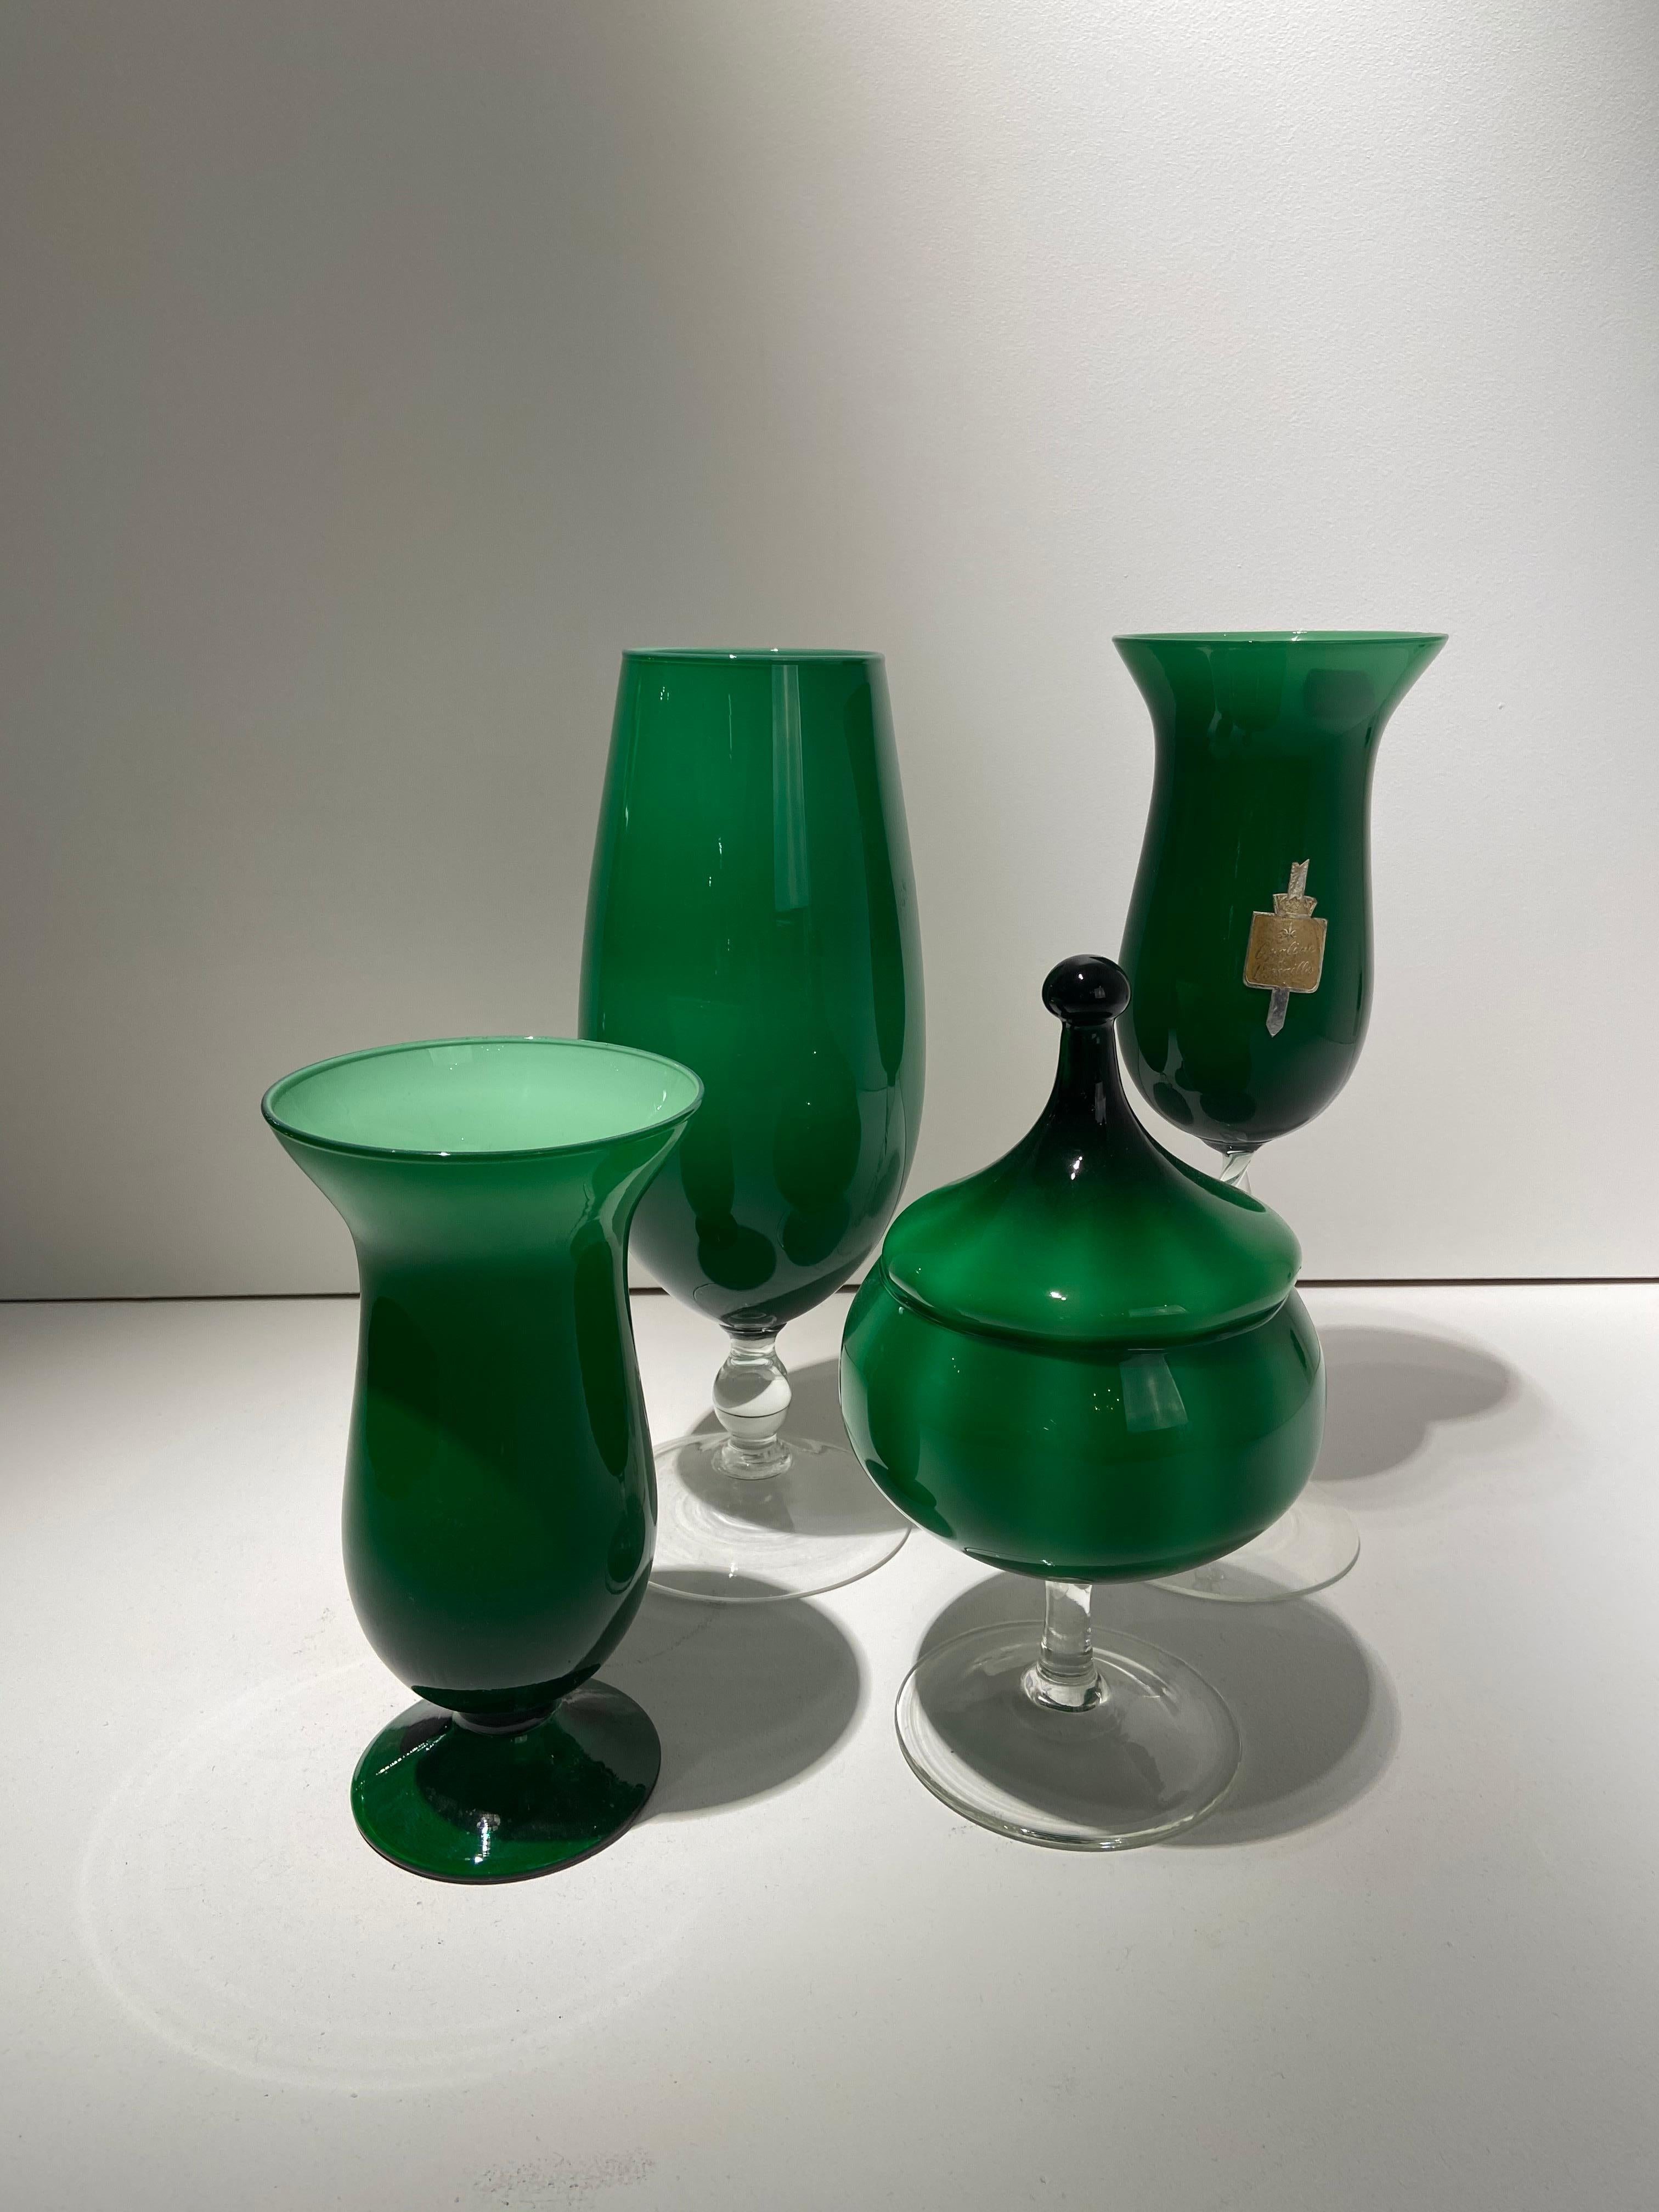 French Versailles and Italian Empoli art glass from the mid-20th century.
Excellent condition.

Available as a lot or individually.

Other colors available.
 